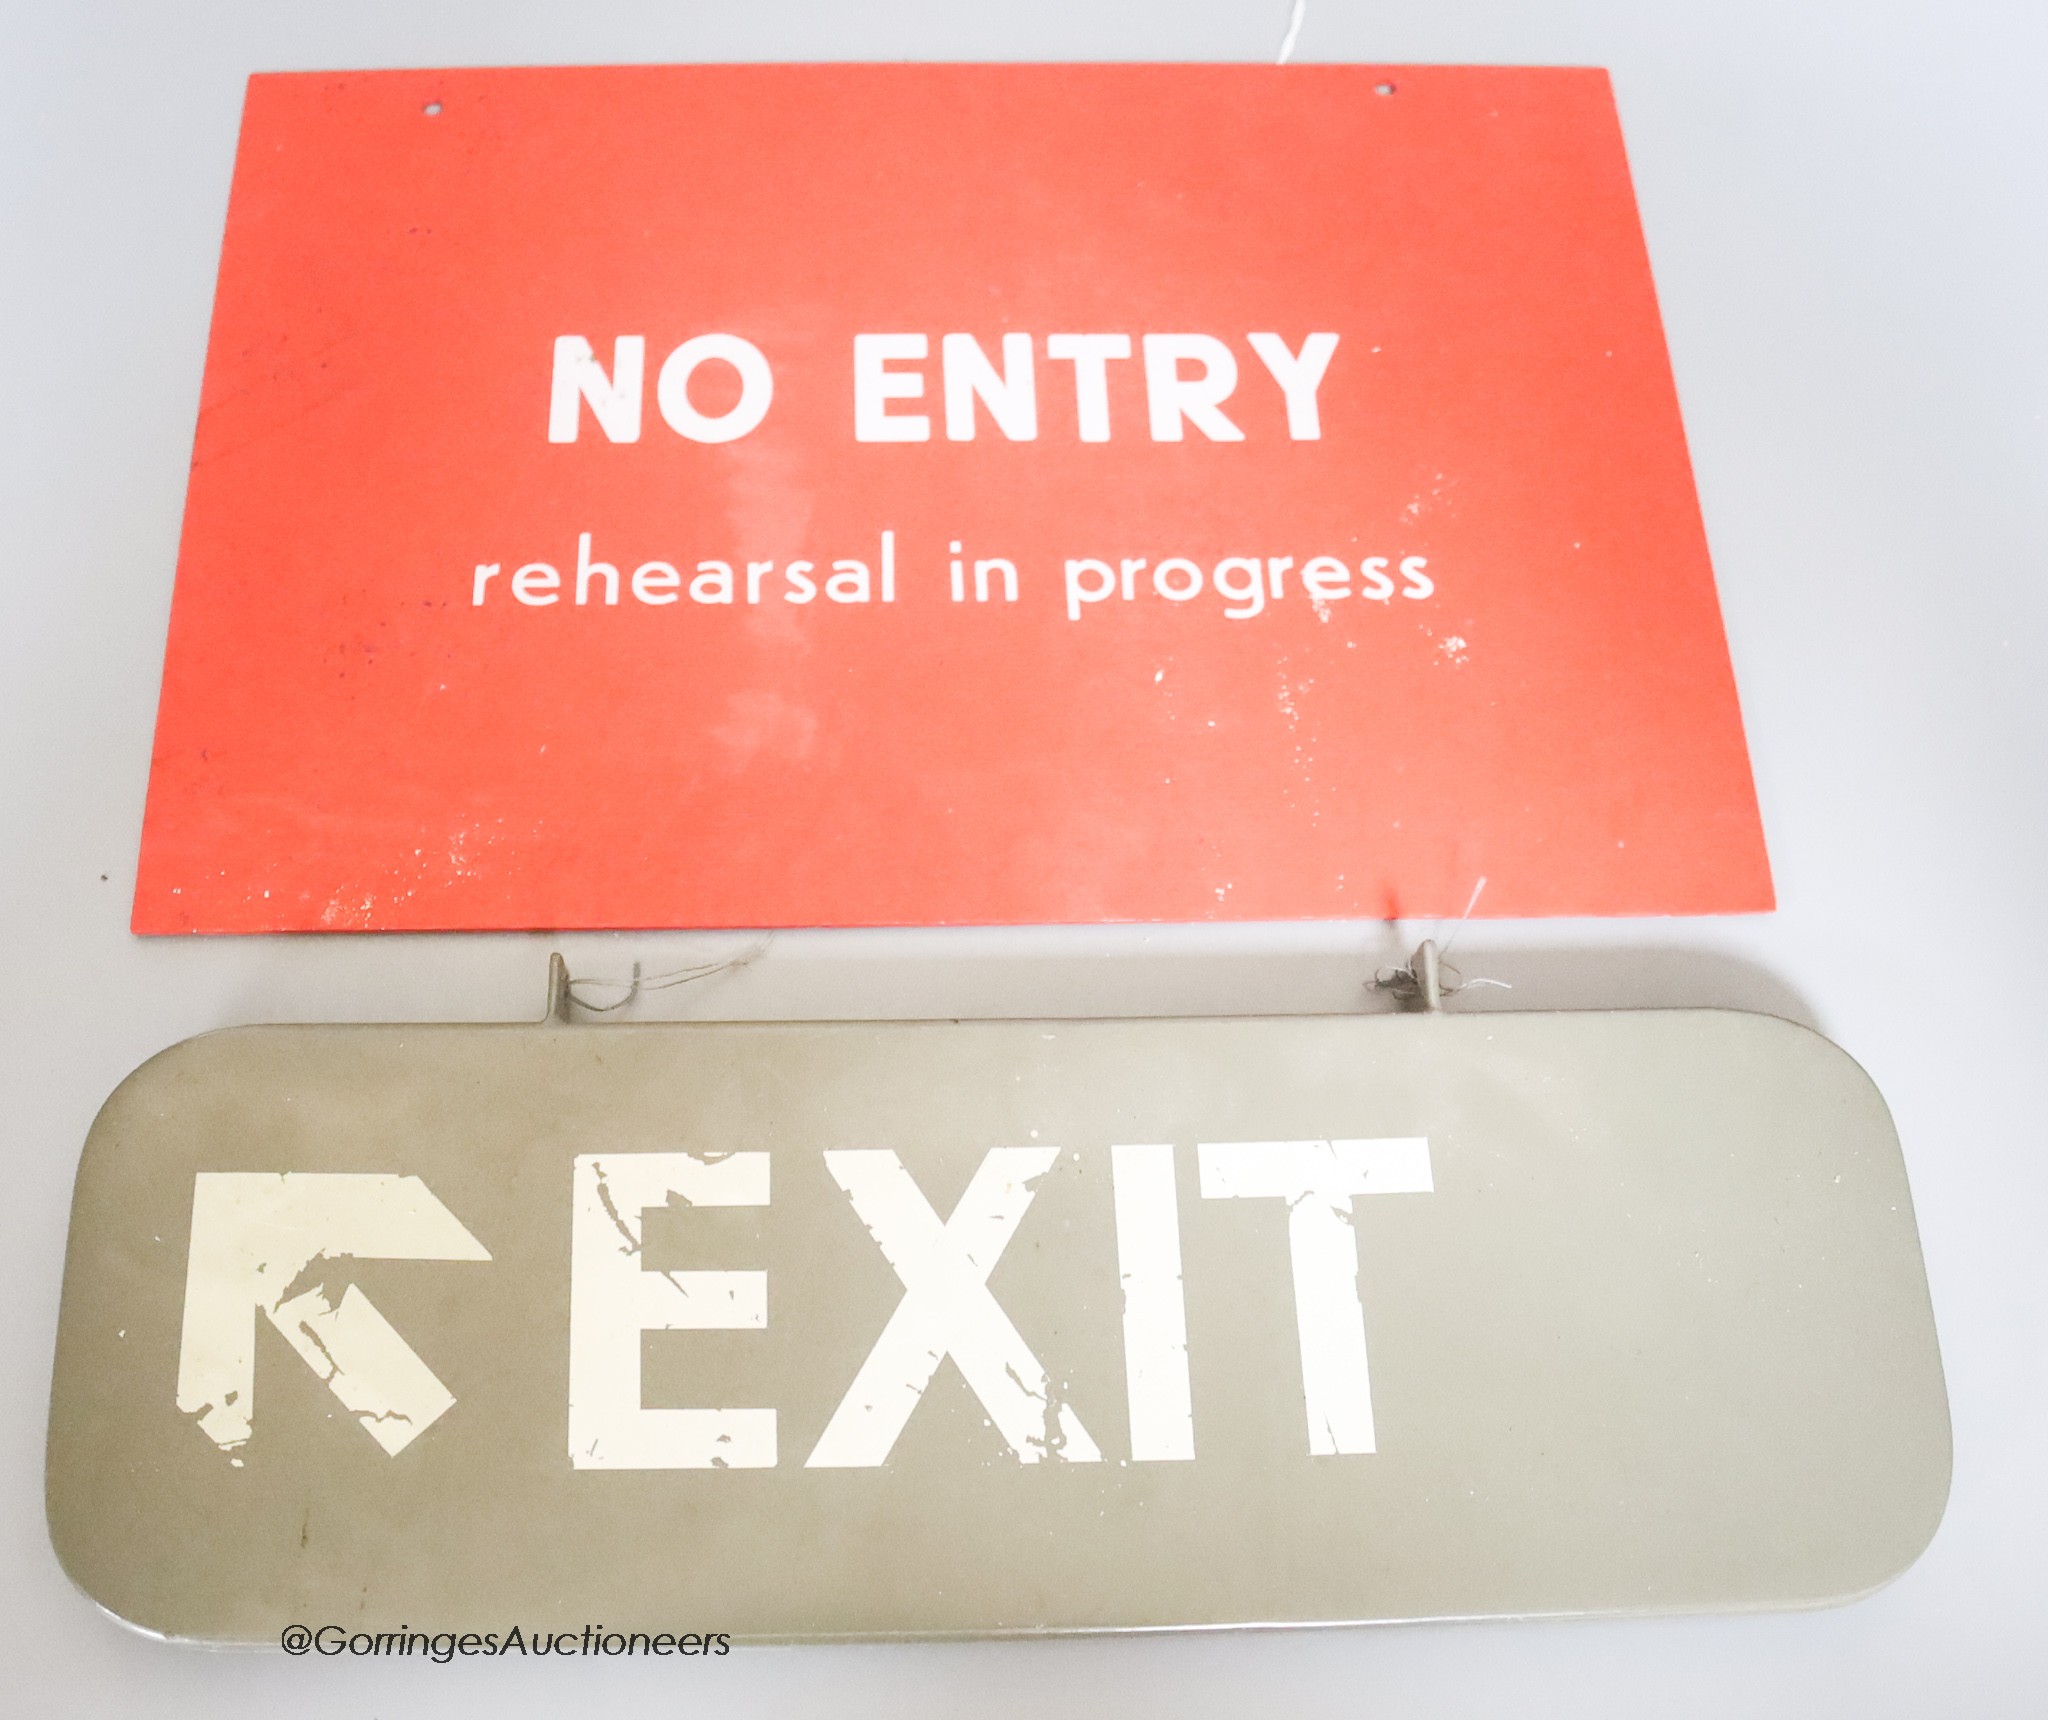 A 20th century 'exit' and 'No Entry Rehearsal in Progress' sign